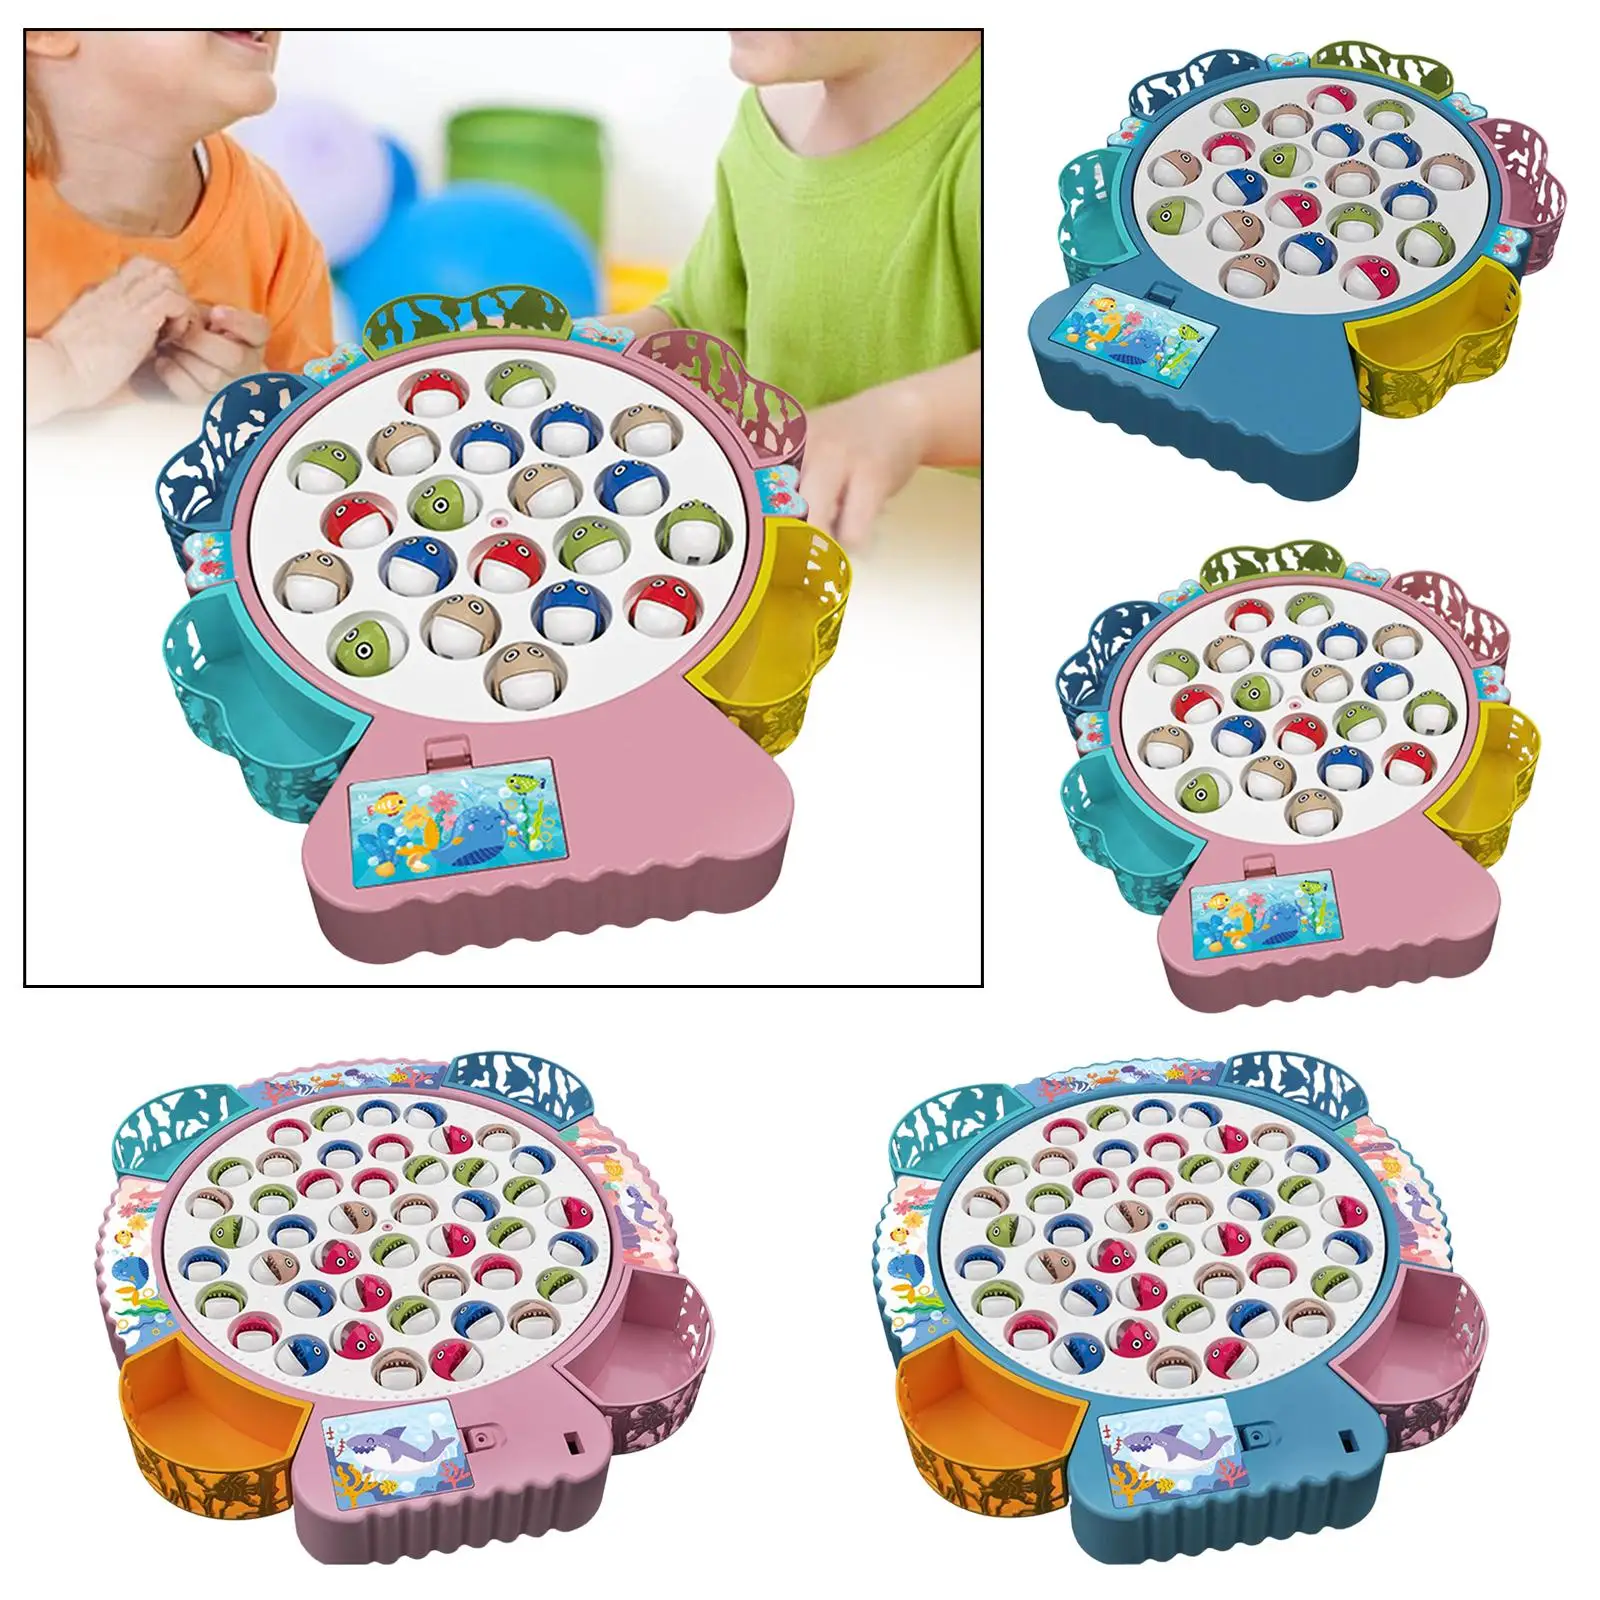 Fishing Game Play Set Learning Fine Motor Skills Electric Fishing Toy for Family Backyard Toddlers Party Favors Preschool